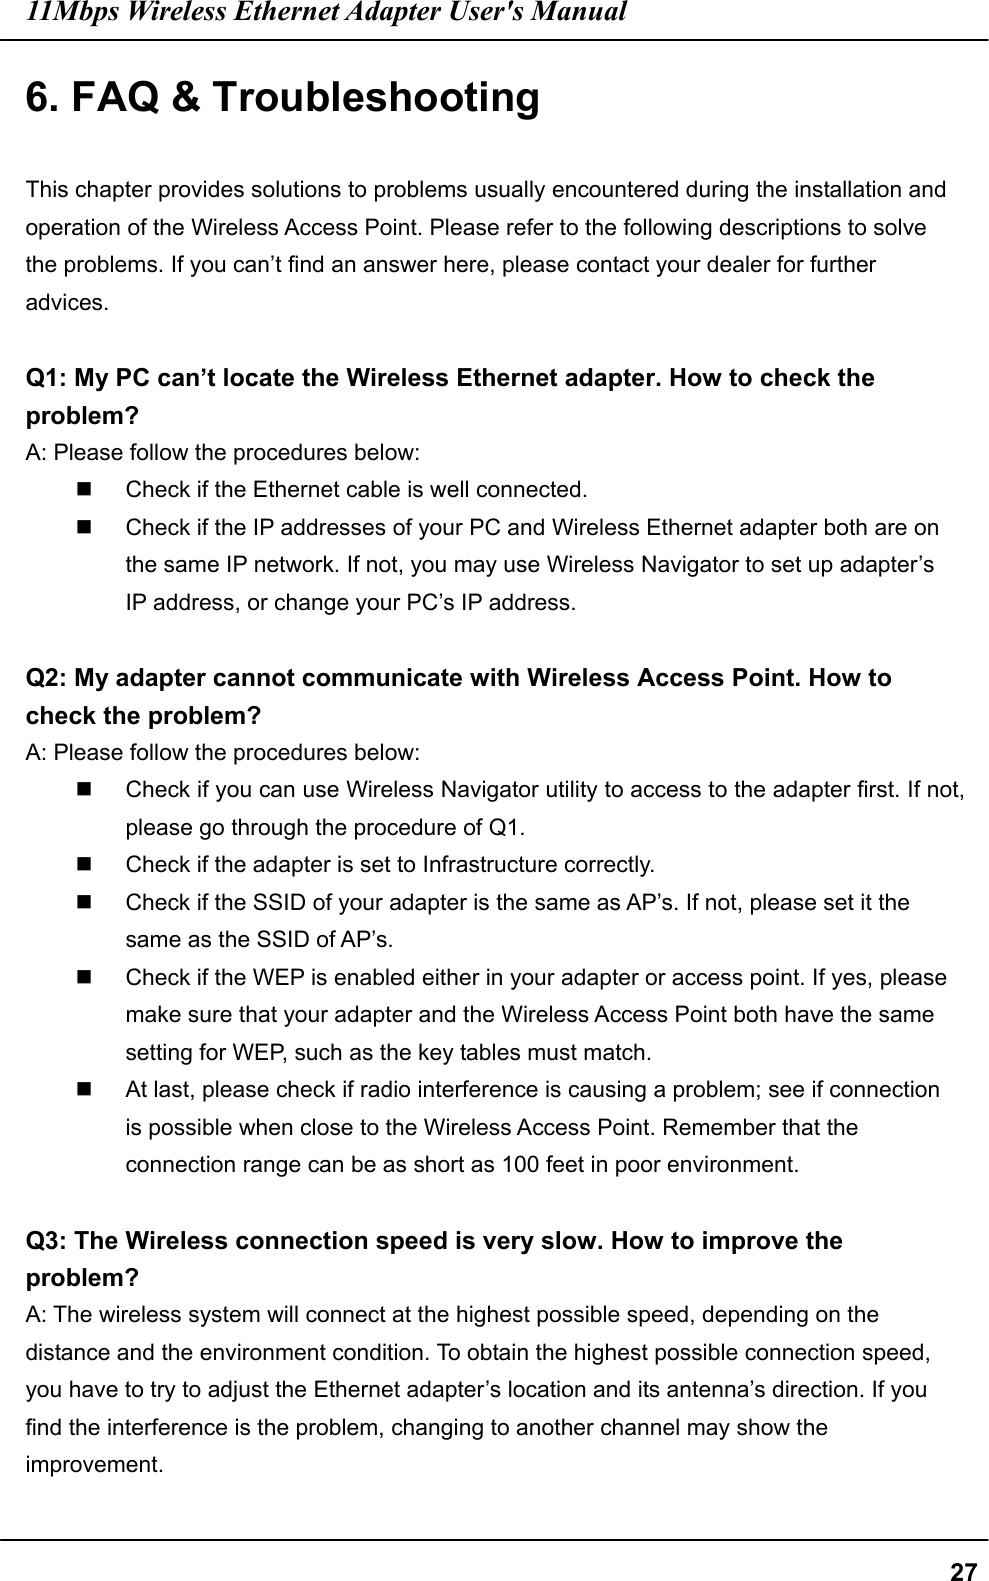 11Mbps Wireless Ethernet Adapter User&apos;s Manual  276. FAQ &amp; Troubleshooting  This chapter provides solutions to problems usually encountered during the installation and operation of the Wireless Access Point. Please refer to the following descriptions to solve the problems. If you can’t find an answer here, please contact your dealer for further advices.  Q1: My PC can’t locate the Wireless Ethernet adapter. How to check the problem? A: Please follow the procedures below:   Check if the Ethernet cable is well connected.   Check if the IP addresses of your PC and Wireless Ethernet adapter both are on the same IP network. If not, you may use Wireless Navigator to set up adapter’s IP address, or change your PC’s IP address.  Q2: My adapter cannot communicate with Wireless Access Point. How to check the problem? A: Please follow the procedures below:   Check if you can use Wireless Navigator utility to access to the adapter first. If not, please go through the procedure of Q1.   Check if the adapter is set to Infrastructure correctly.     Check if the SSID of your adapter is the same as AP’s. If not, please set it the same as the SSID of AP’s.   Check if the WEP is enabled either in your adapter or access point. If yes, please make sure that your adapter and the Wireless Access Point both have the same setting for WEP, such as the key tables must match.   At last, please check if radio interference is causing a problem; see if connection is possible when close to the Wireless Access Point. Remember that the connection range can be as short as 100 feet in poor environment.  Q3: The Wireless connection speed is very slow. How to improve the problem? A: The wireless system will connect at the highest possible speed, depending on the distance and the environment condition. To obtain the highest possible connection speed, you have to try to adjust the Ethernet adapter’s location and its antenna’s direction. If you find the interference is the problem, changing to another channel may show the improvement.  